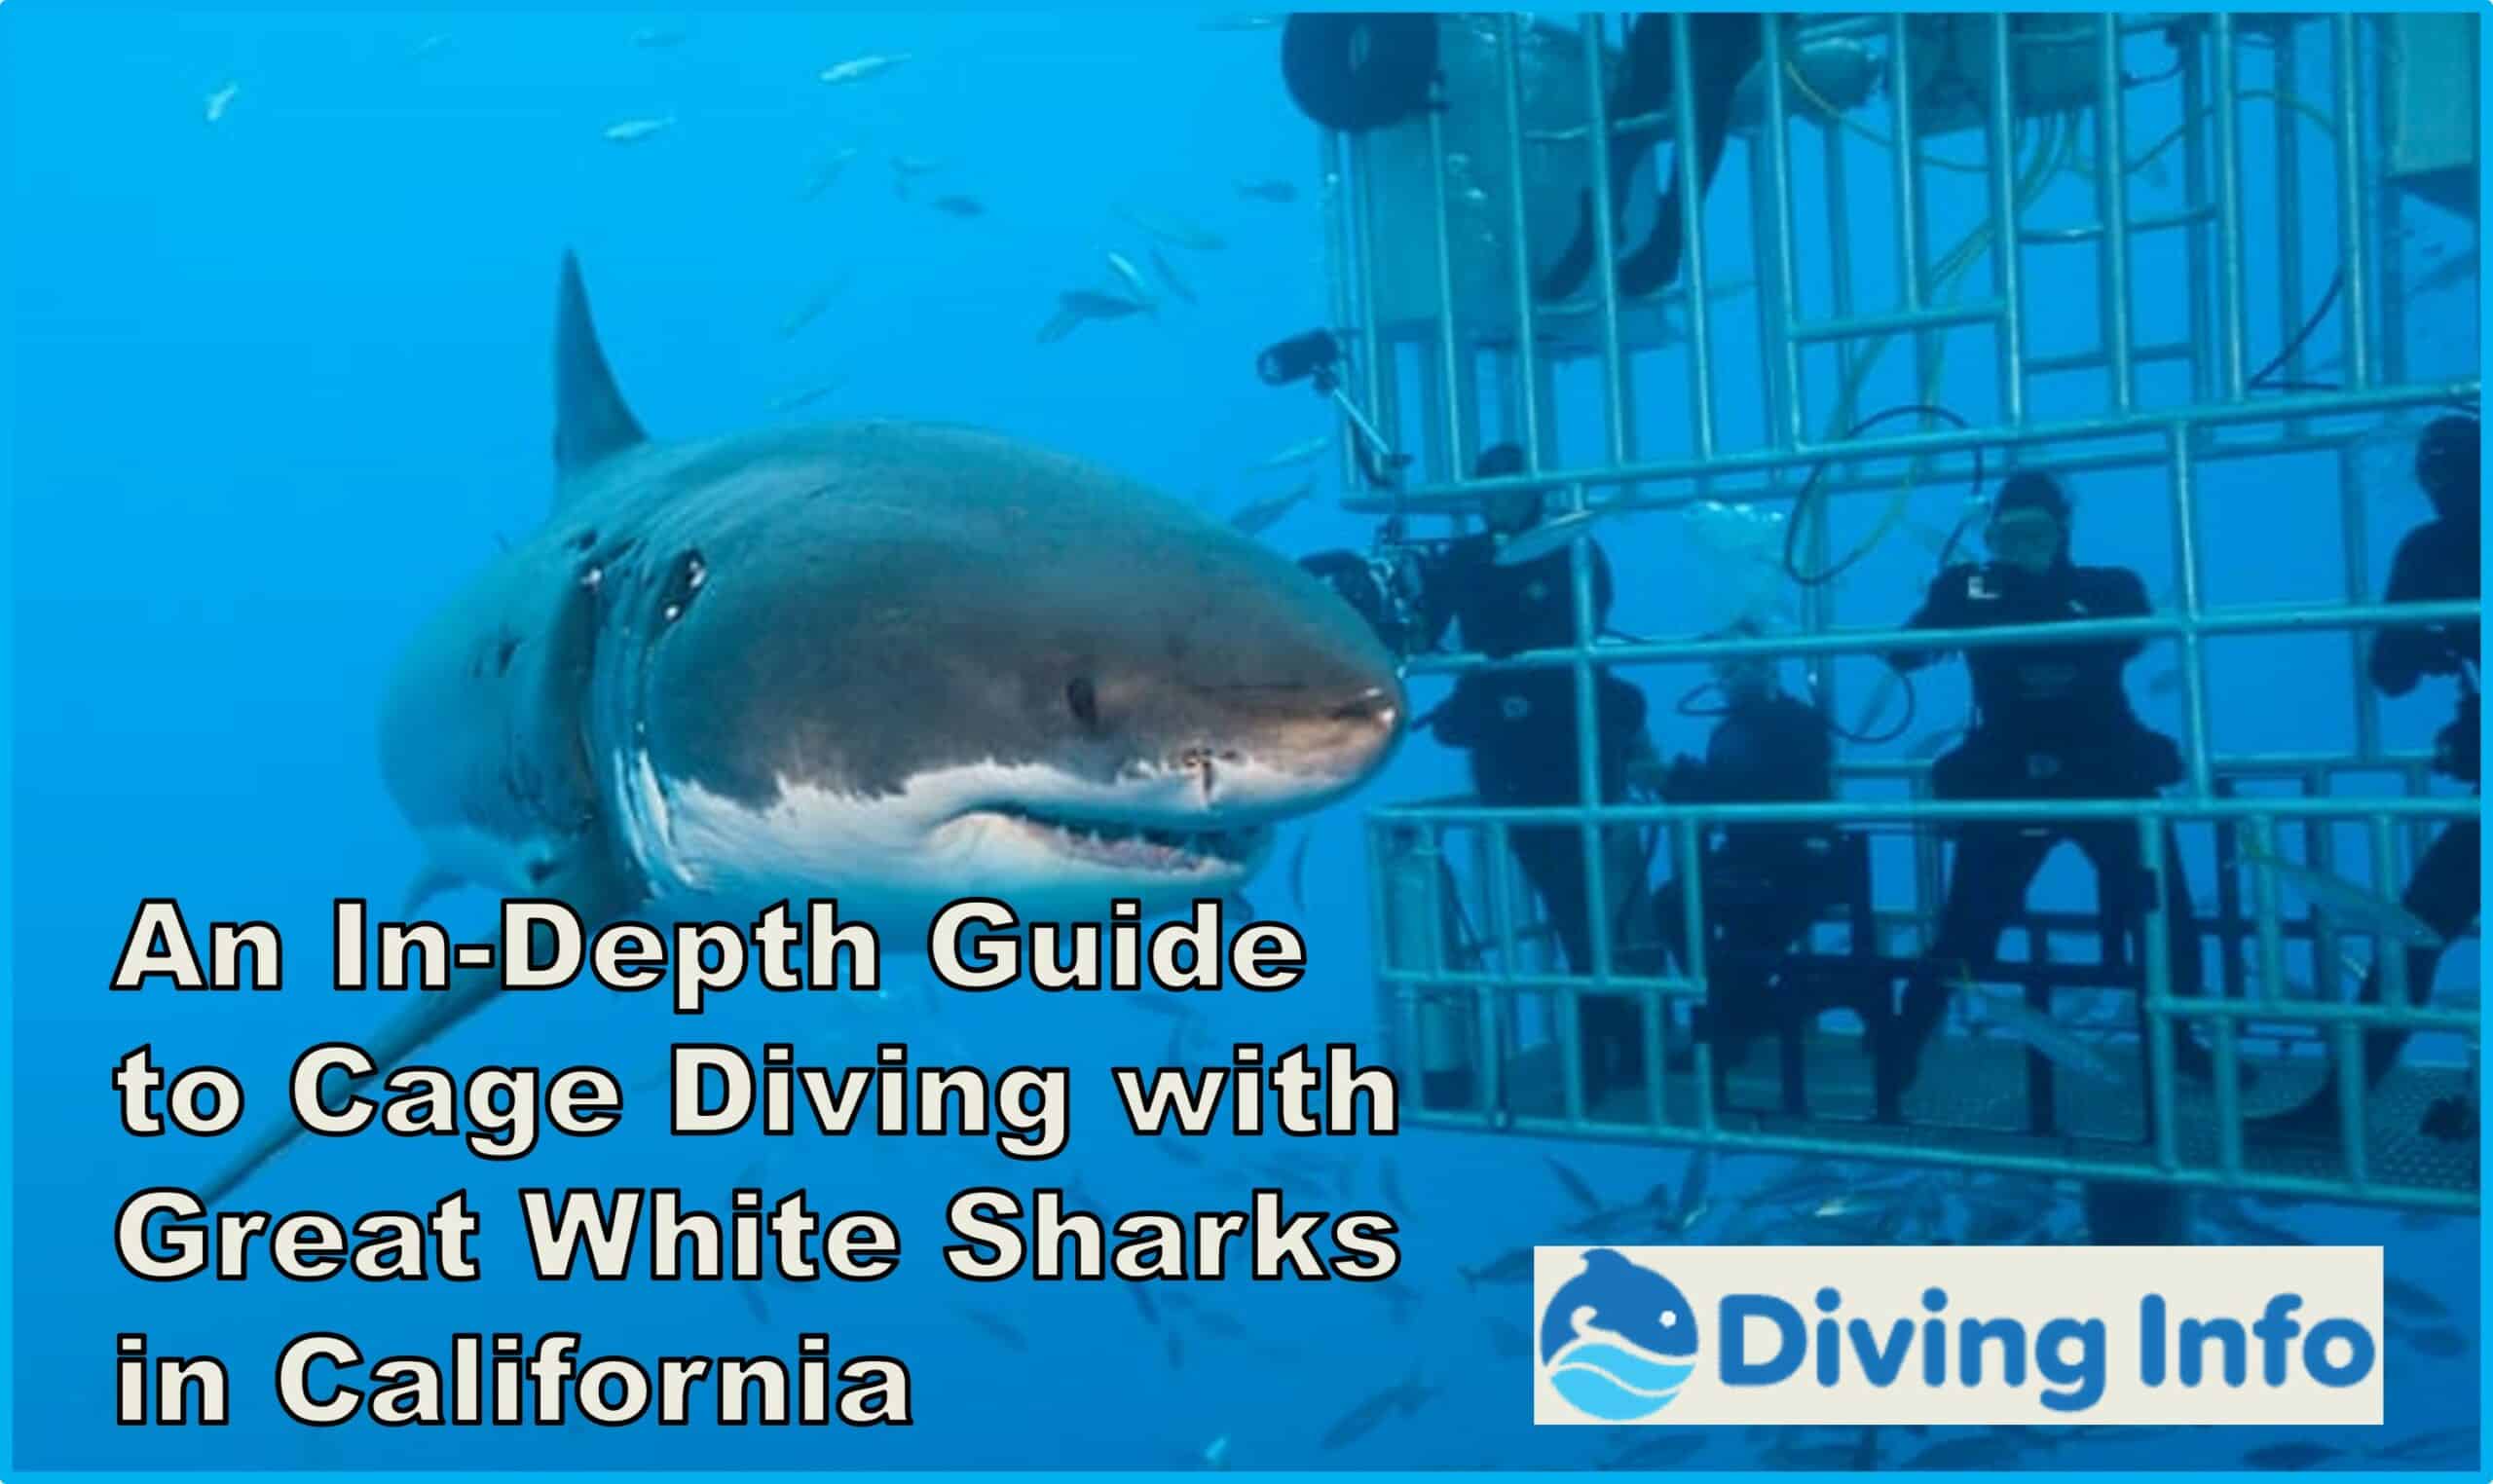 An In-Depth Guide to Cage Diving with Great White Sharks in California